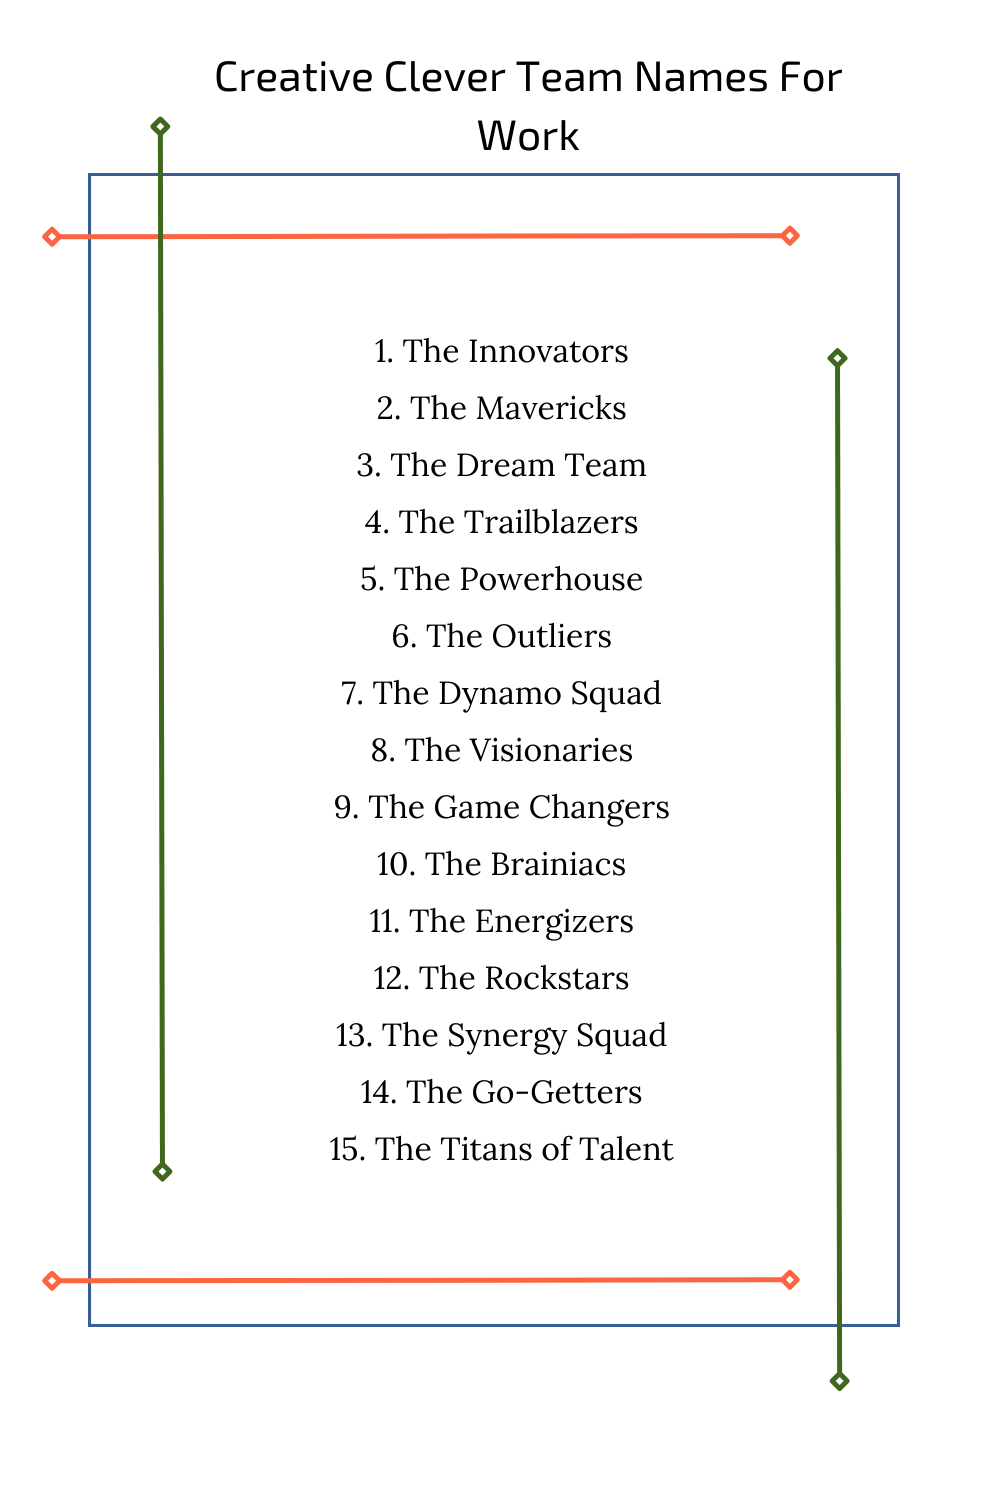 Creative Clever Team Names For Work